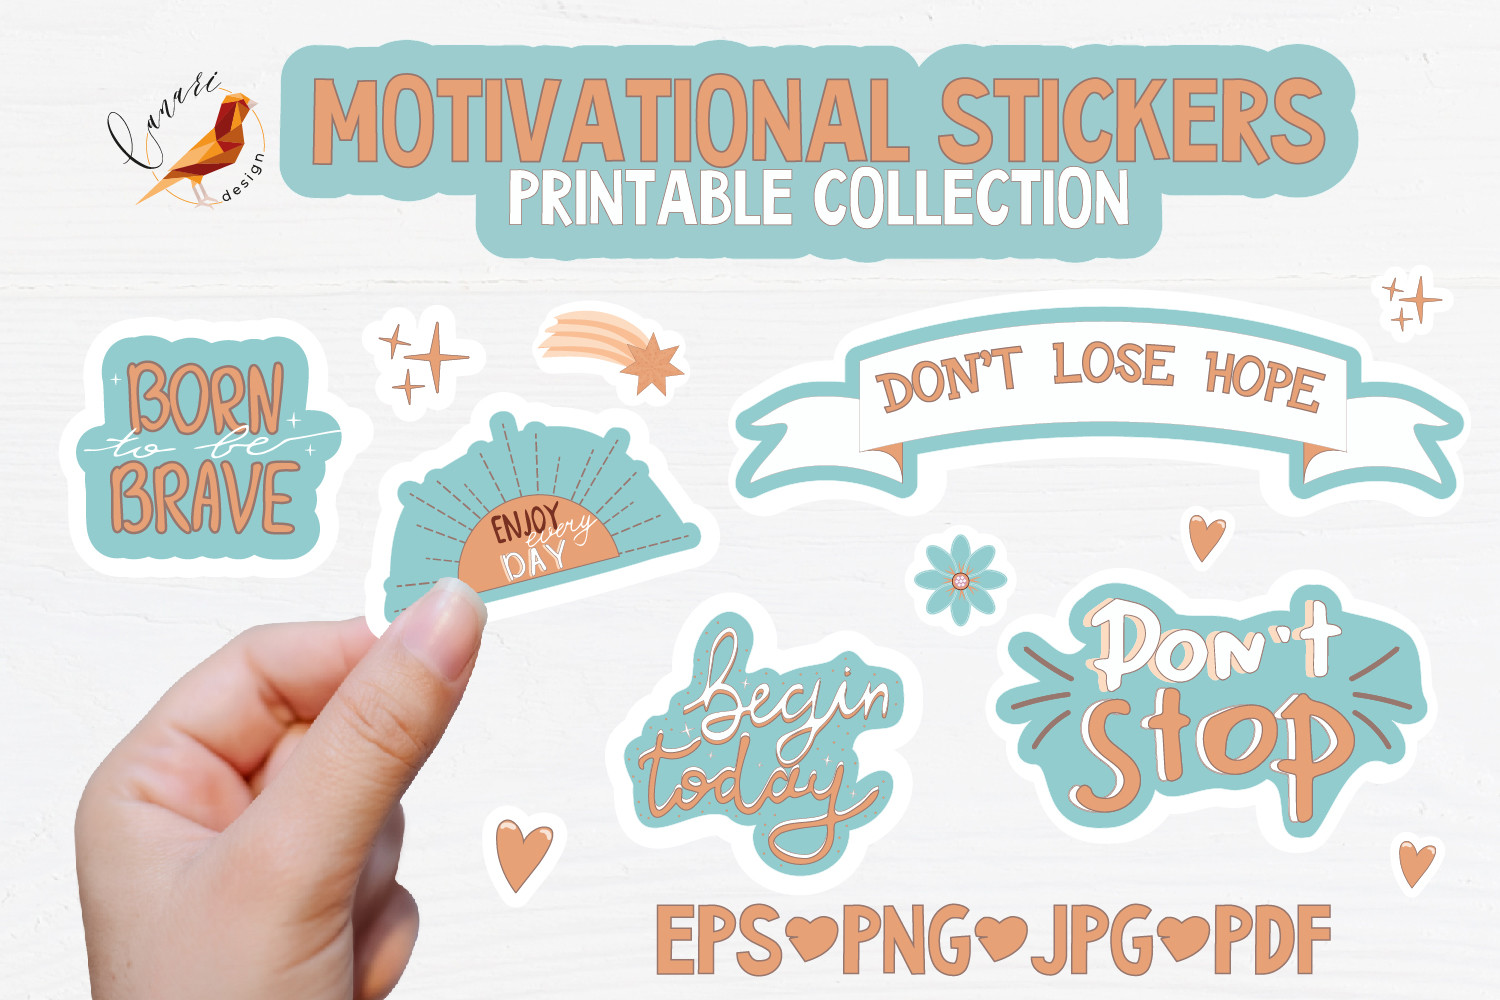 Inspirational-Motivational Stickers Graphic by Happy Printables Club ·  Creative Fabrica